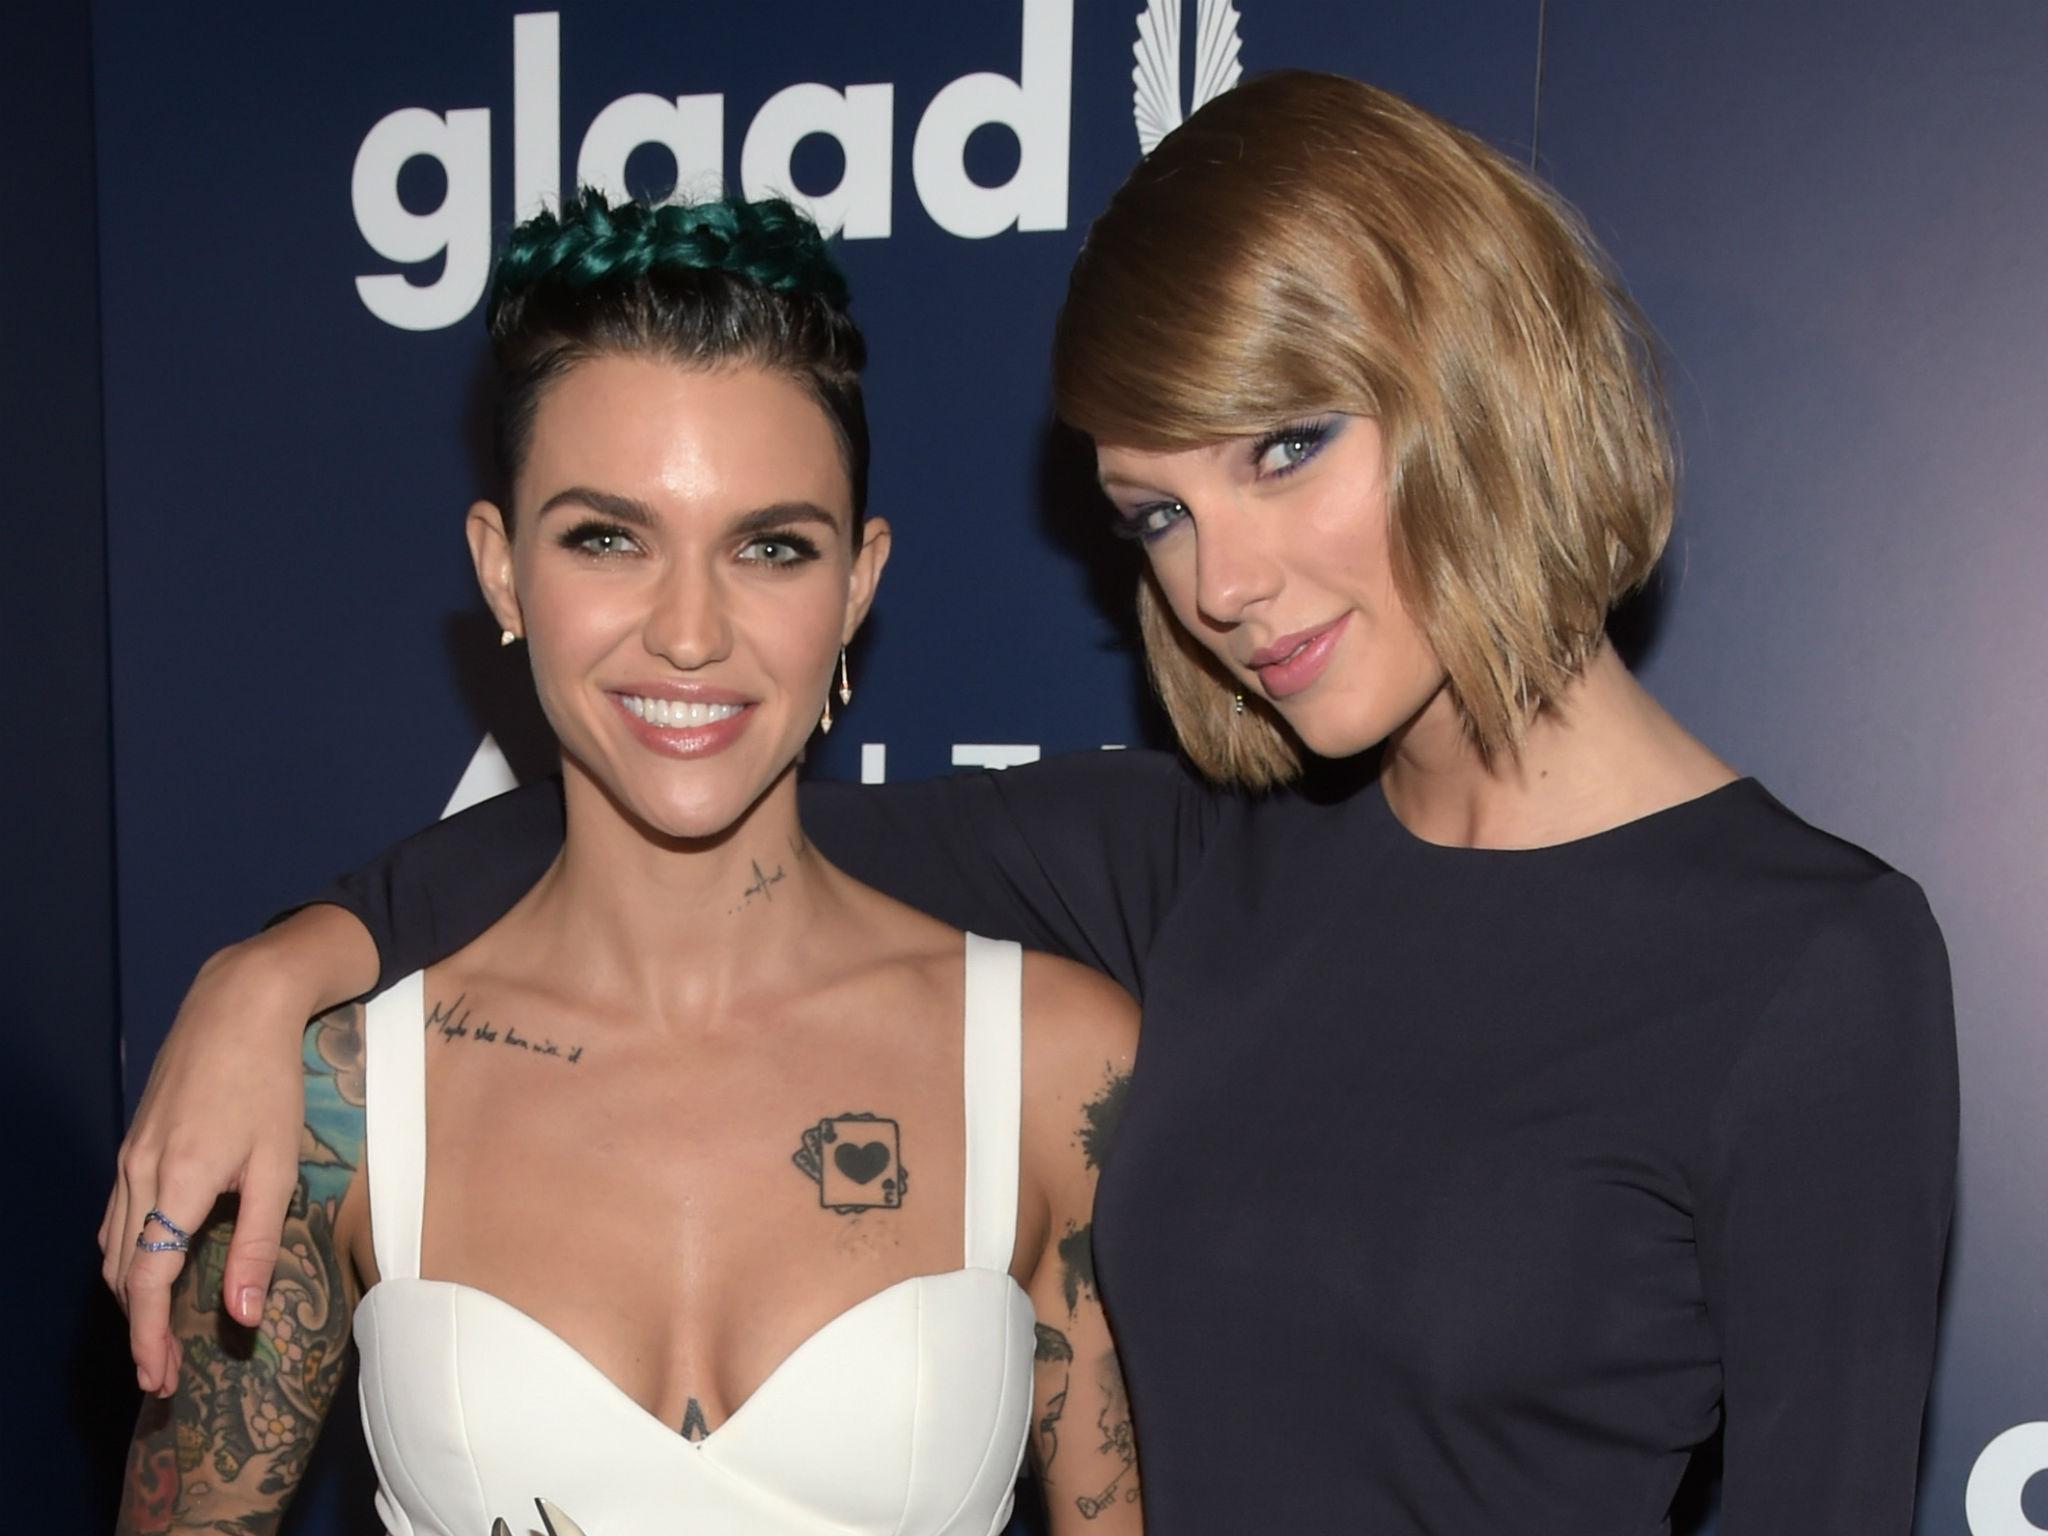 Ruby Rose and Taylor Swift at the Glaad awards in April, 2016